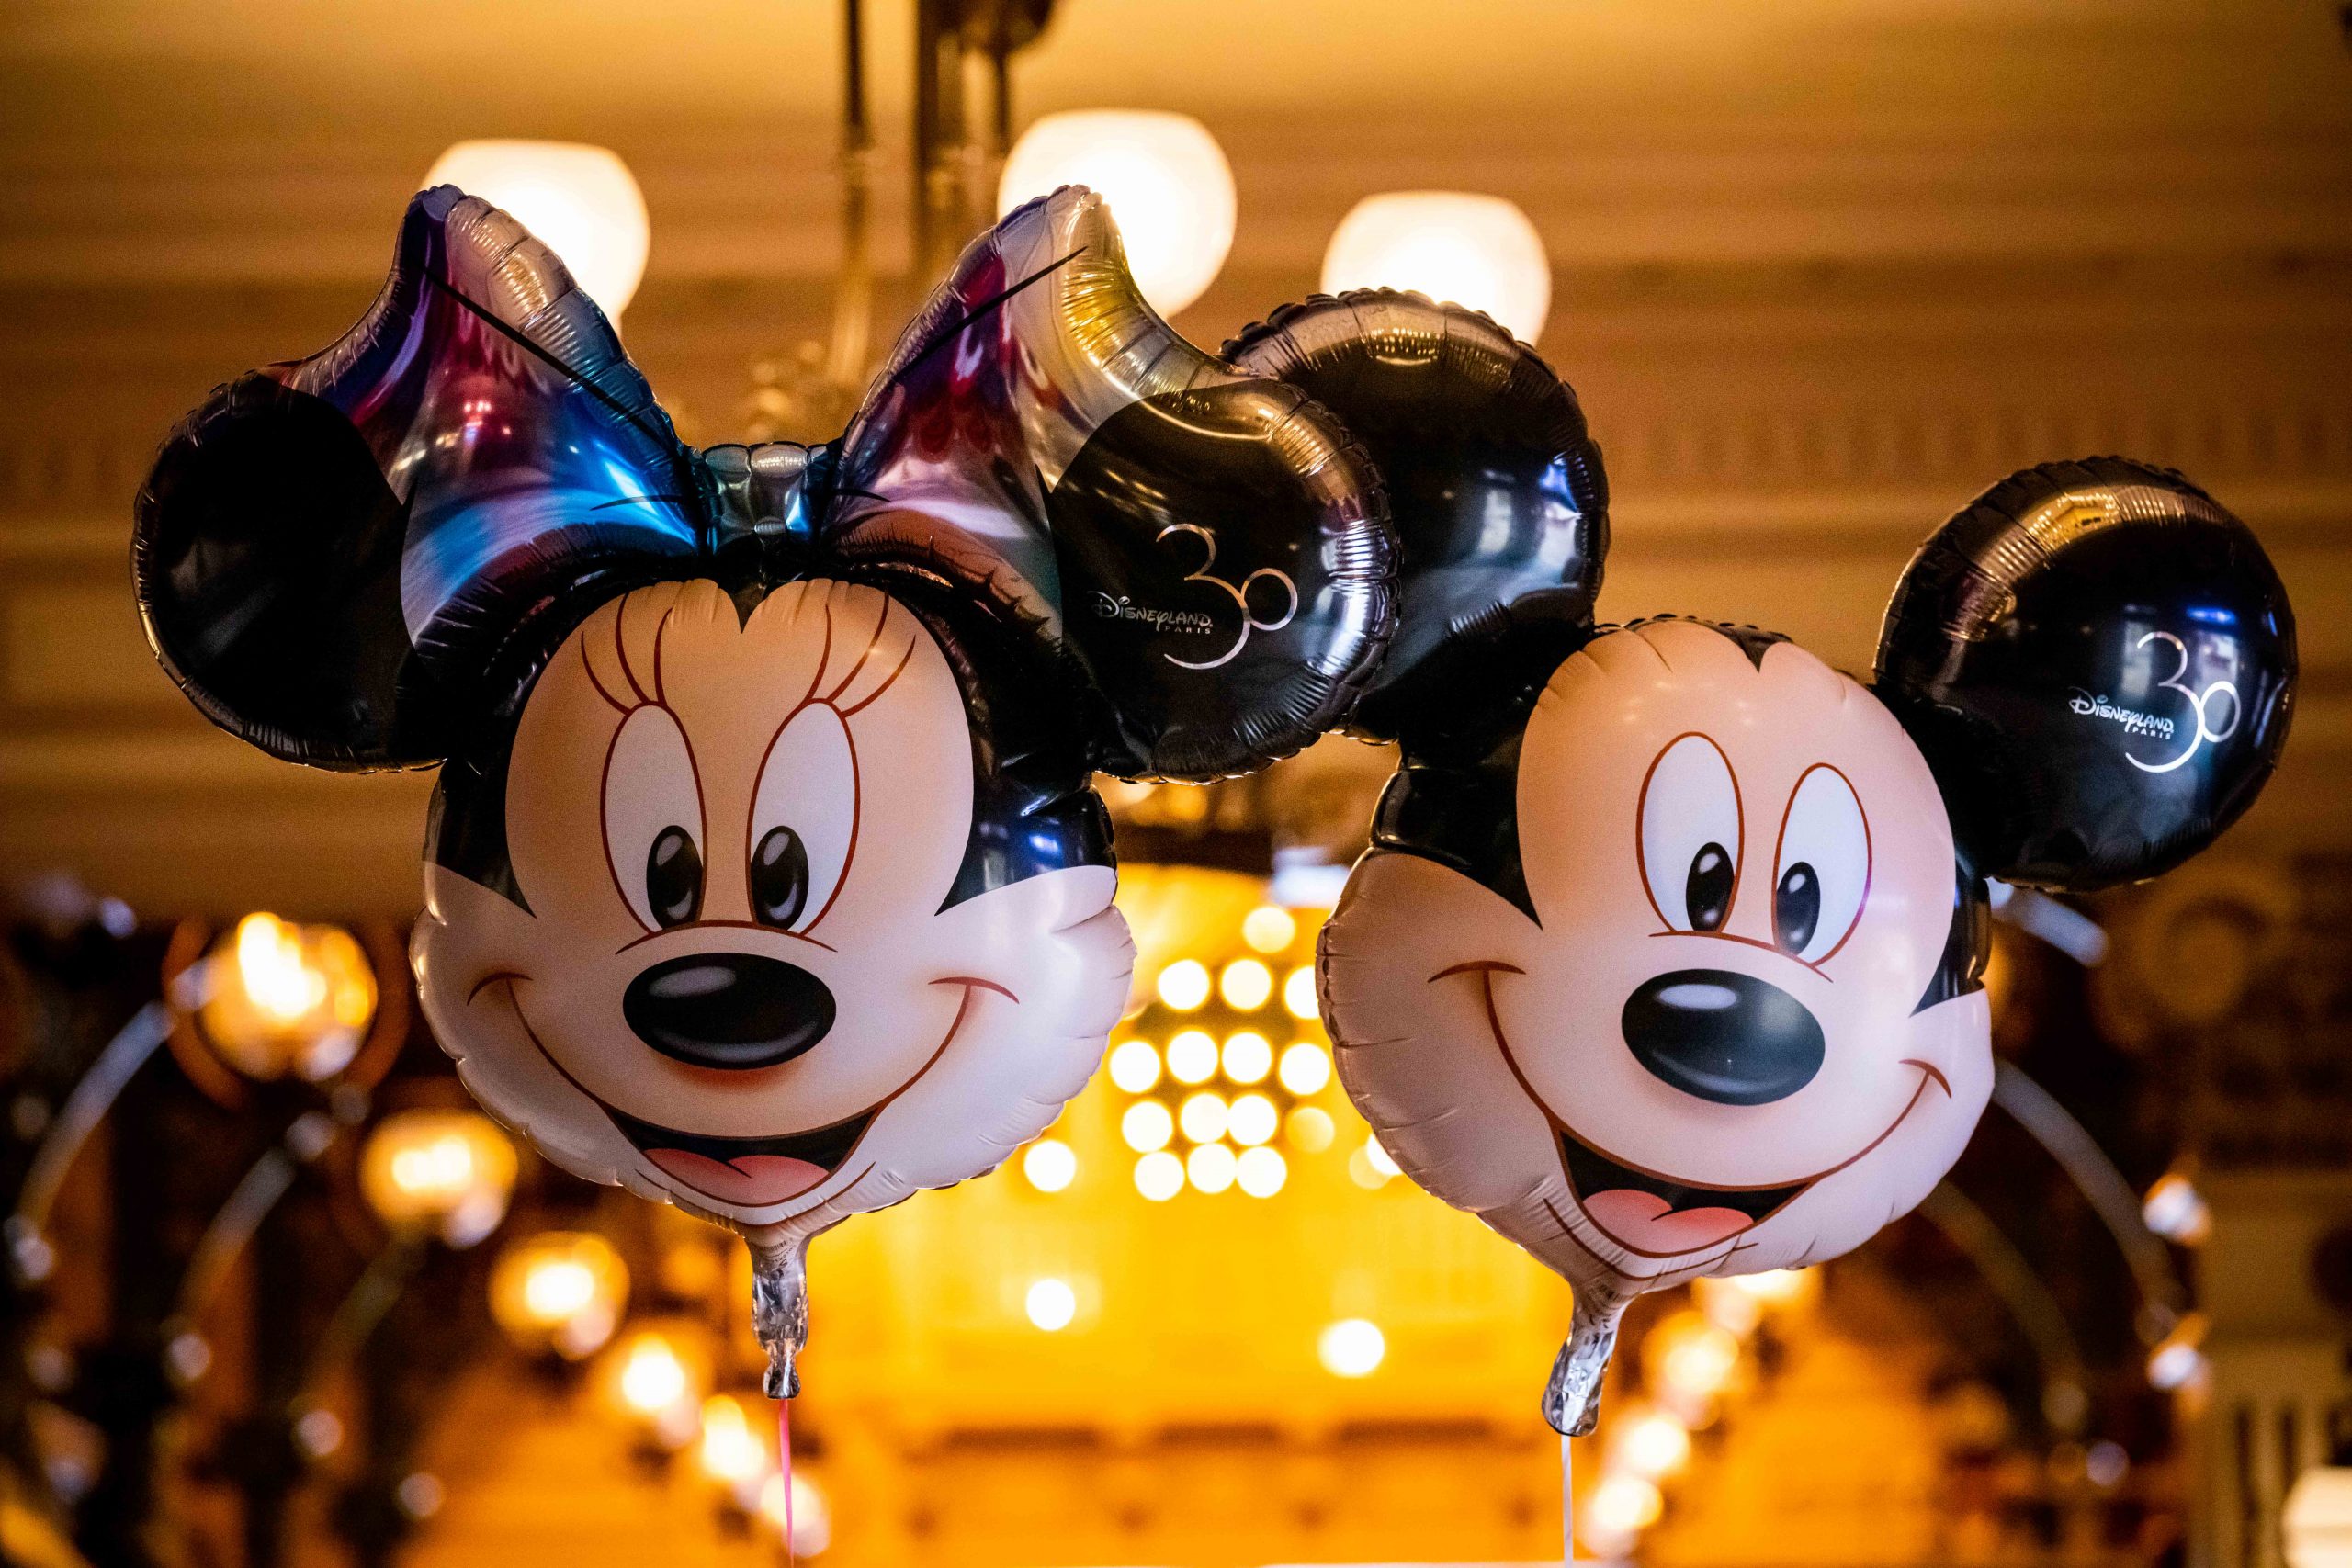 Disneyland Paris Celebrates its 30th Anniversary with special Drone Show and more!